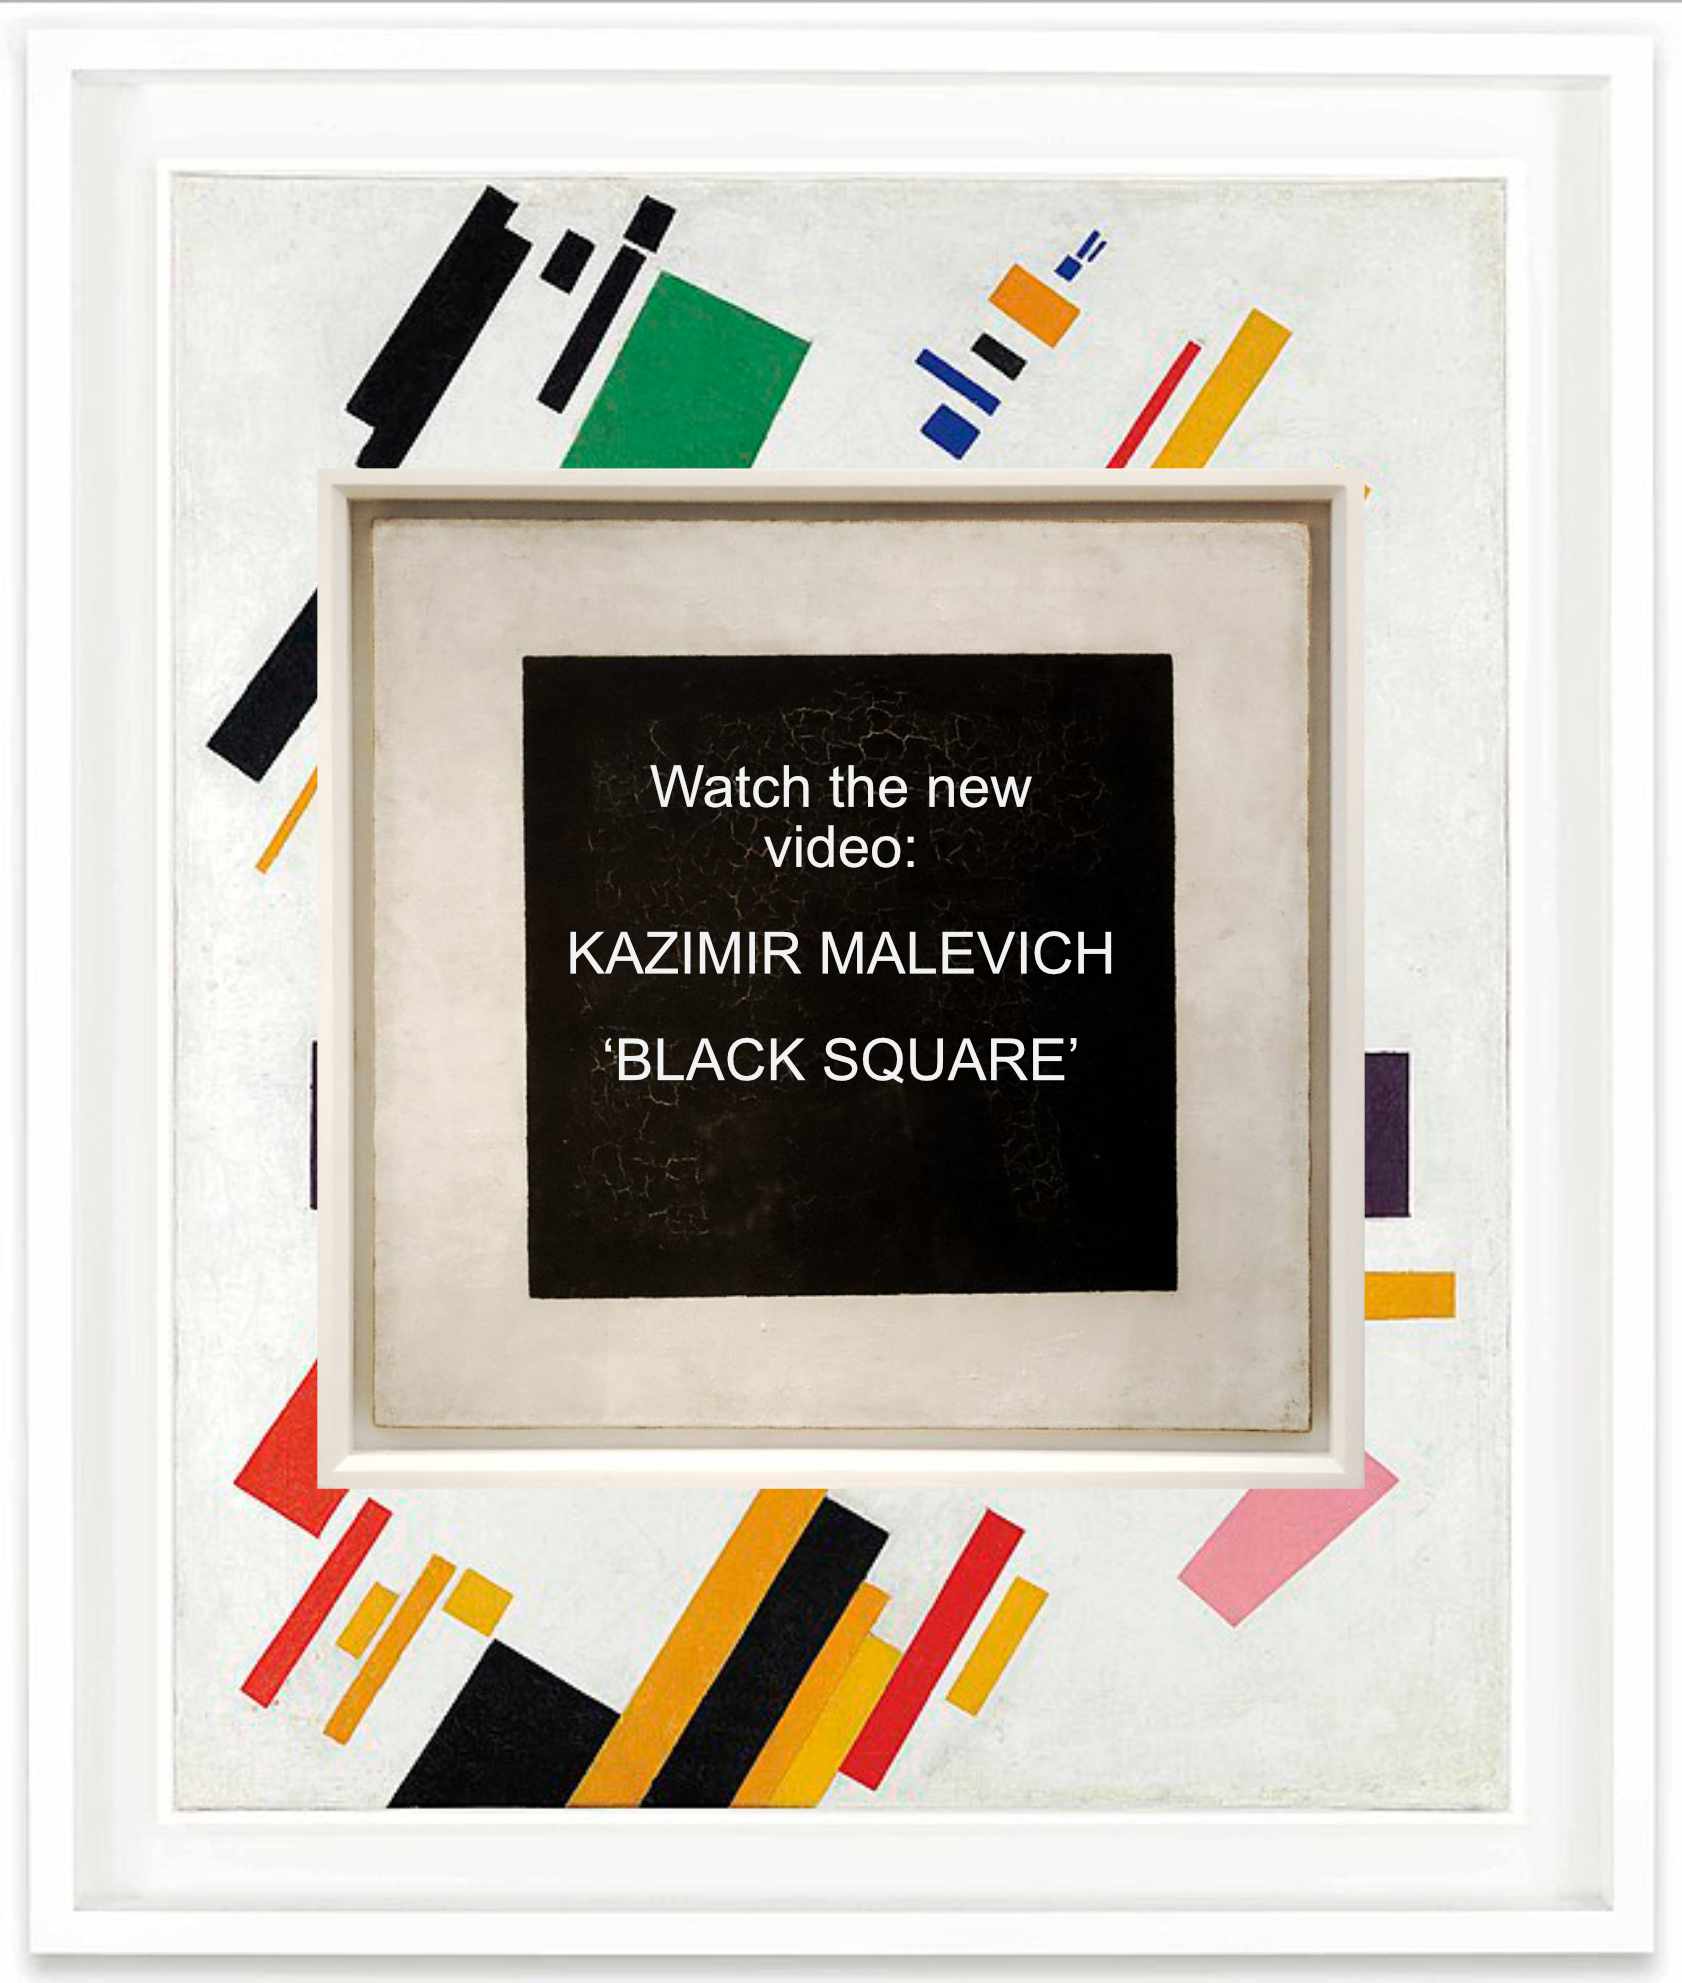 picture with text about new video about malevich